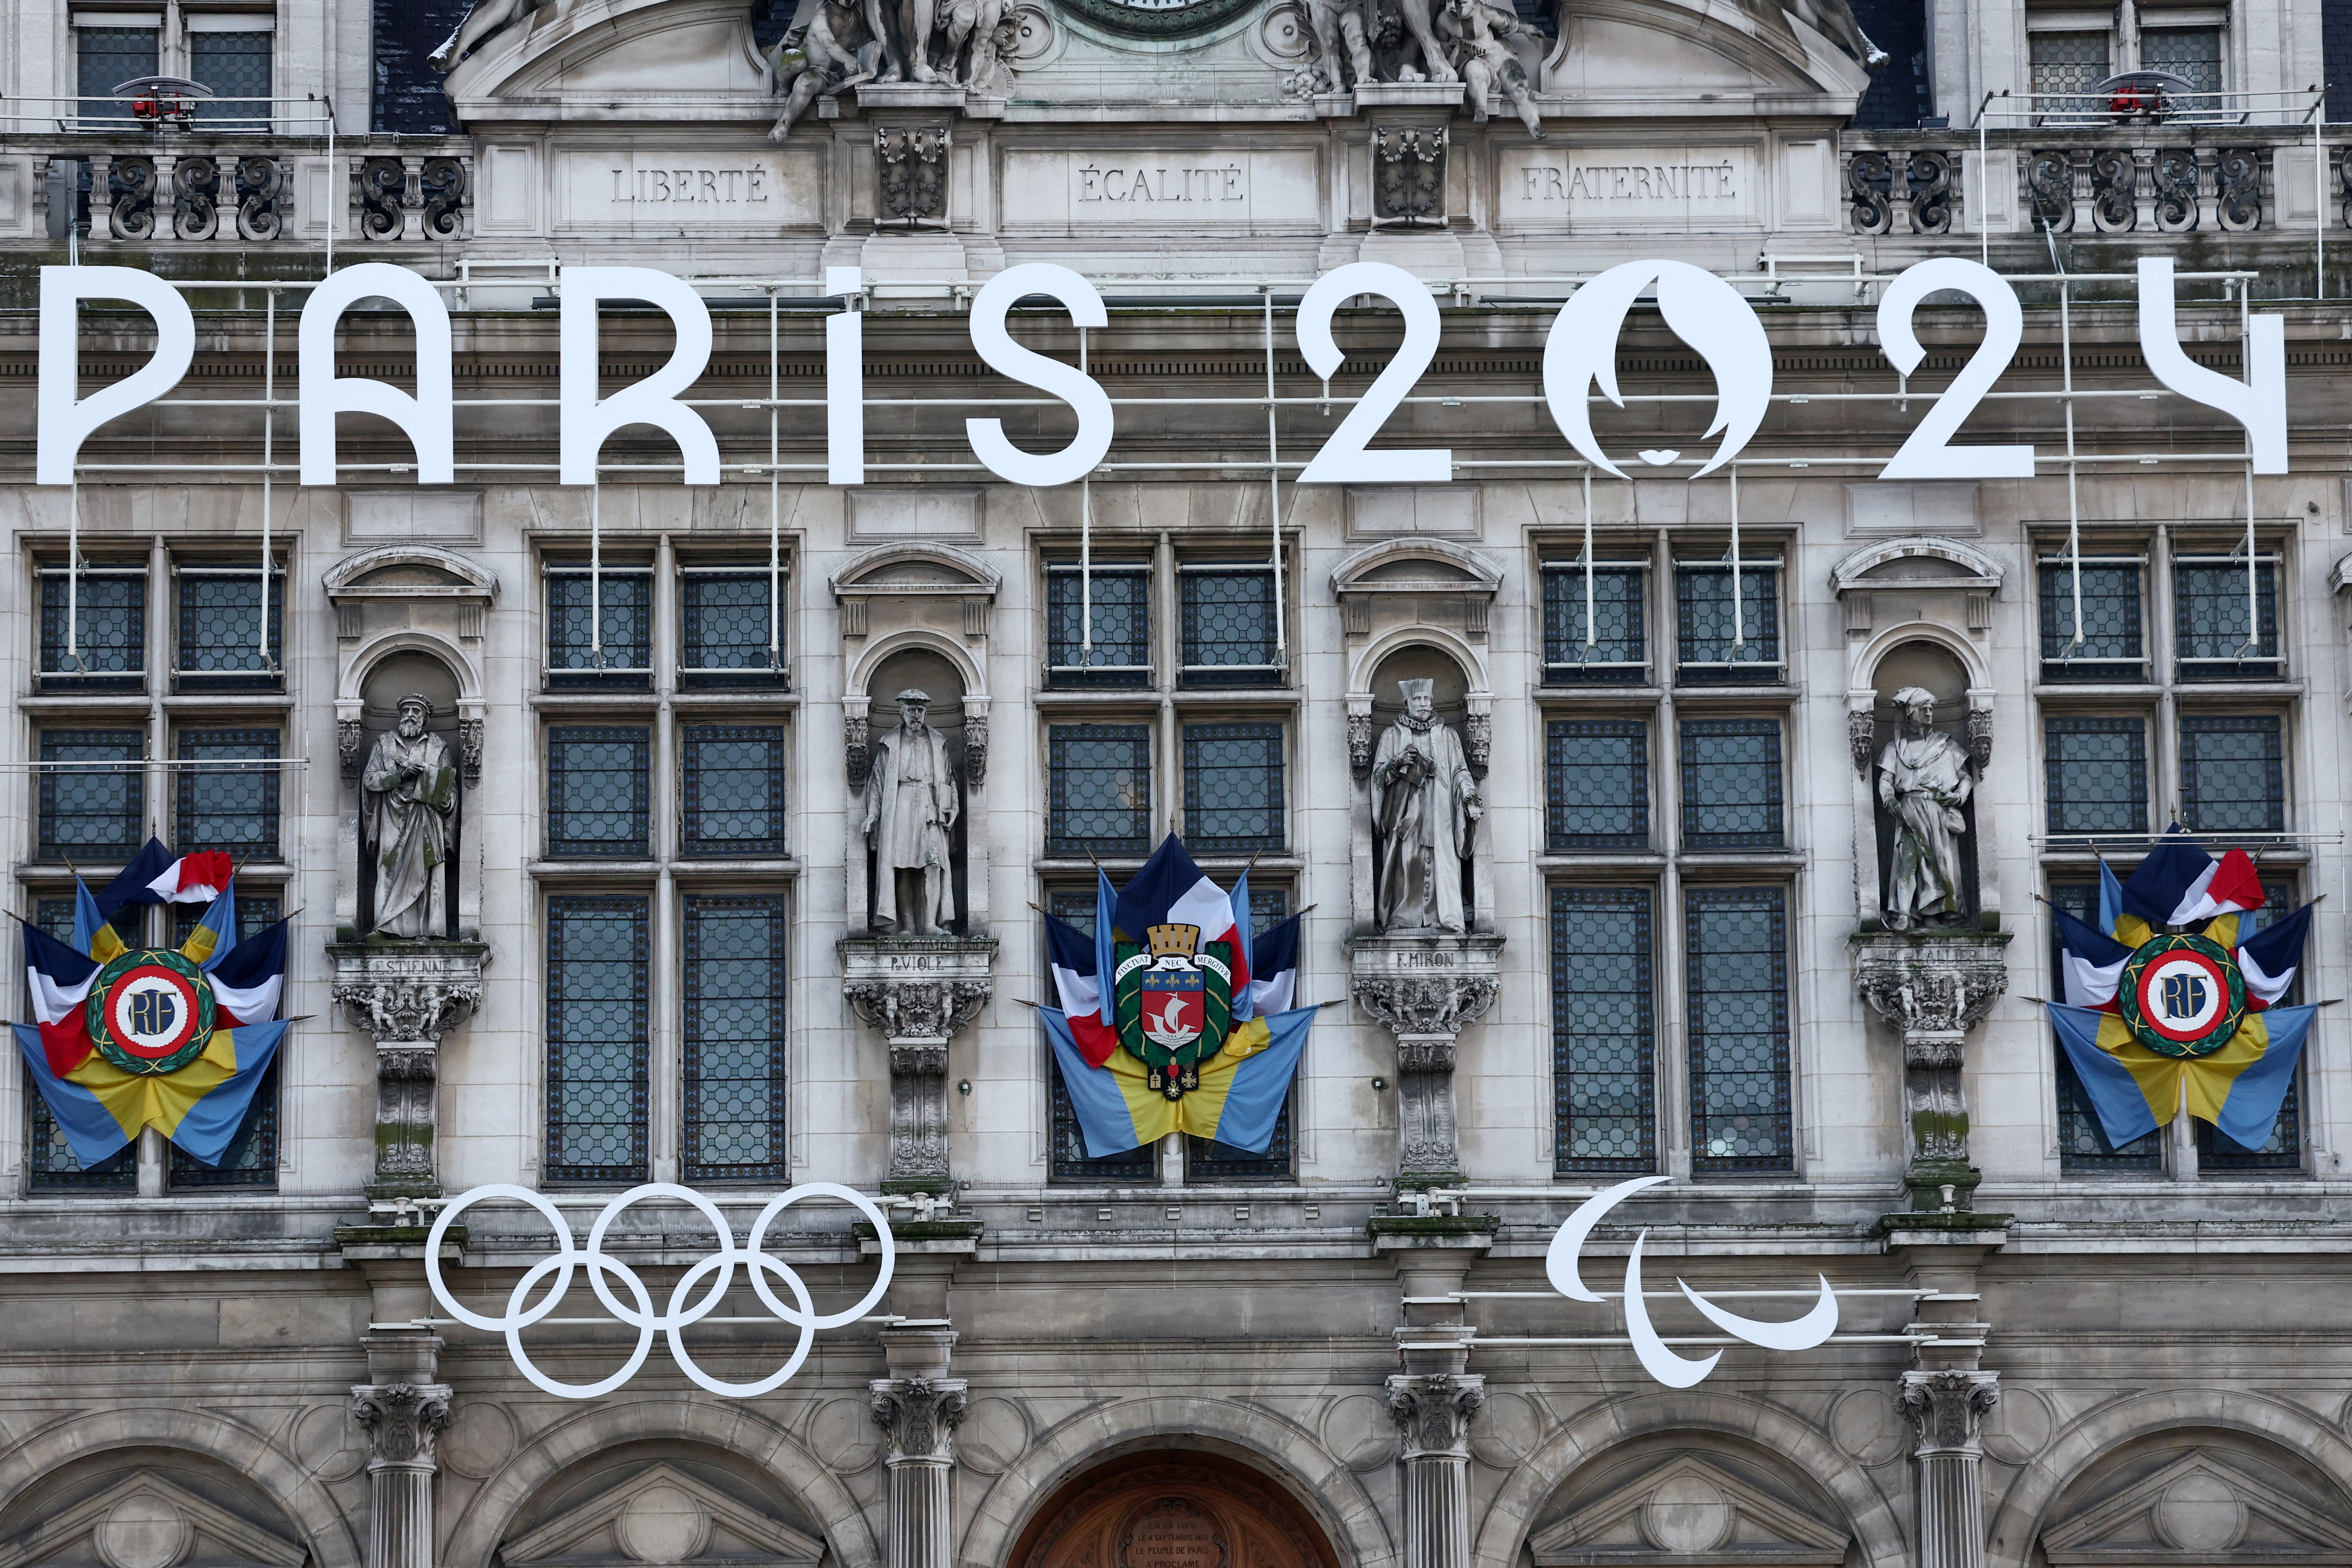 The Olympic rings and the logo of Paris 2024 Olympic Games